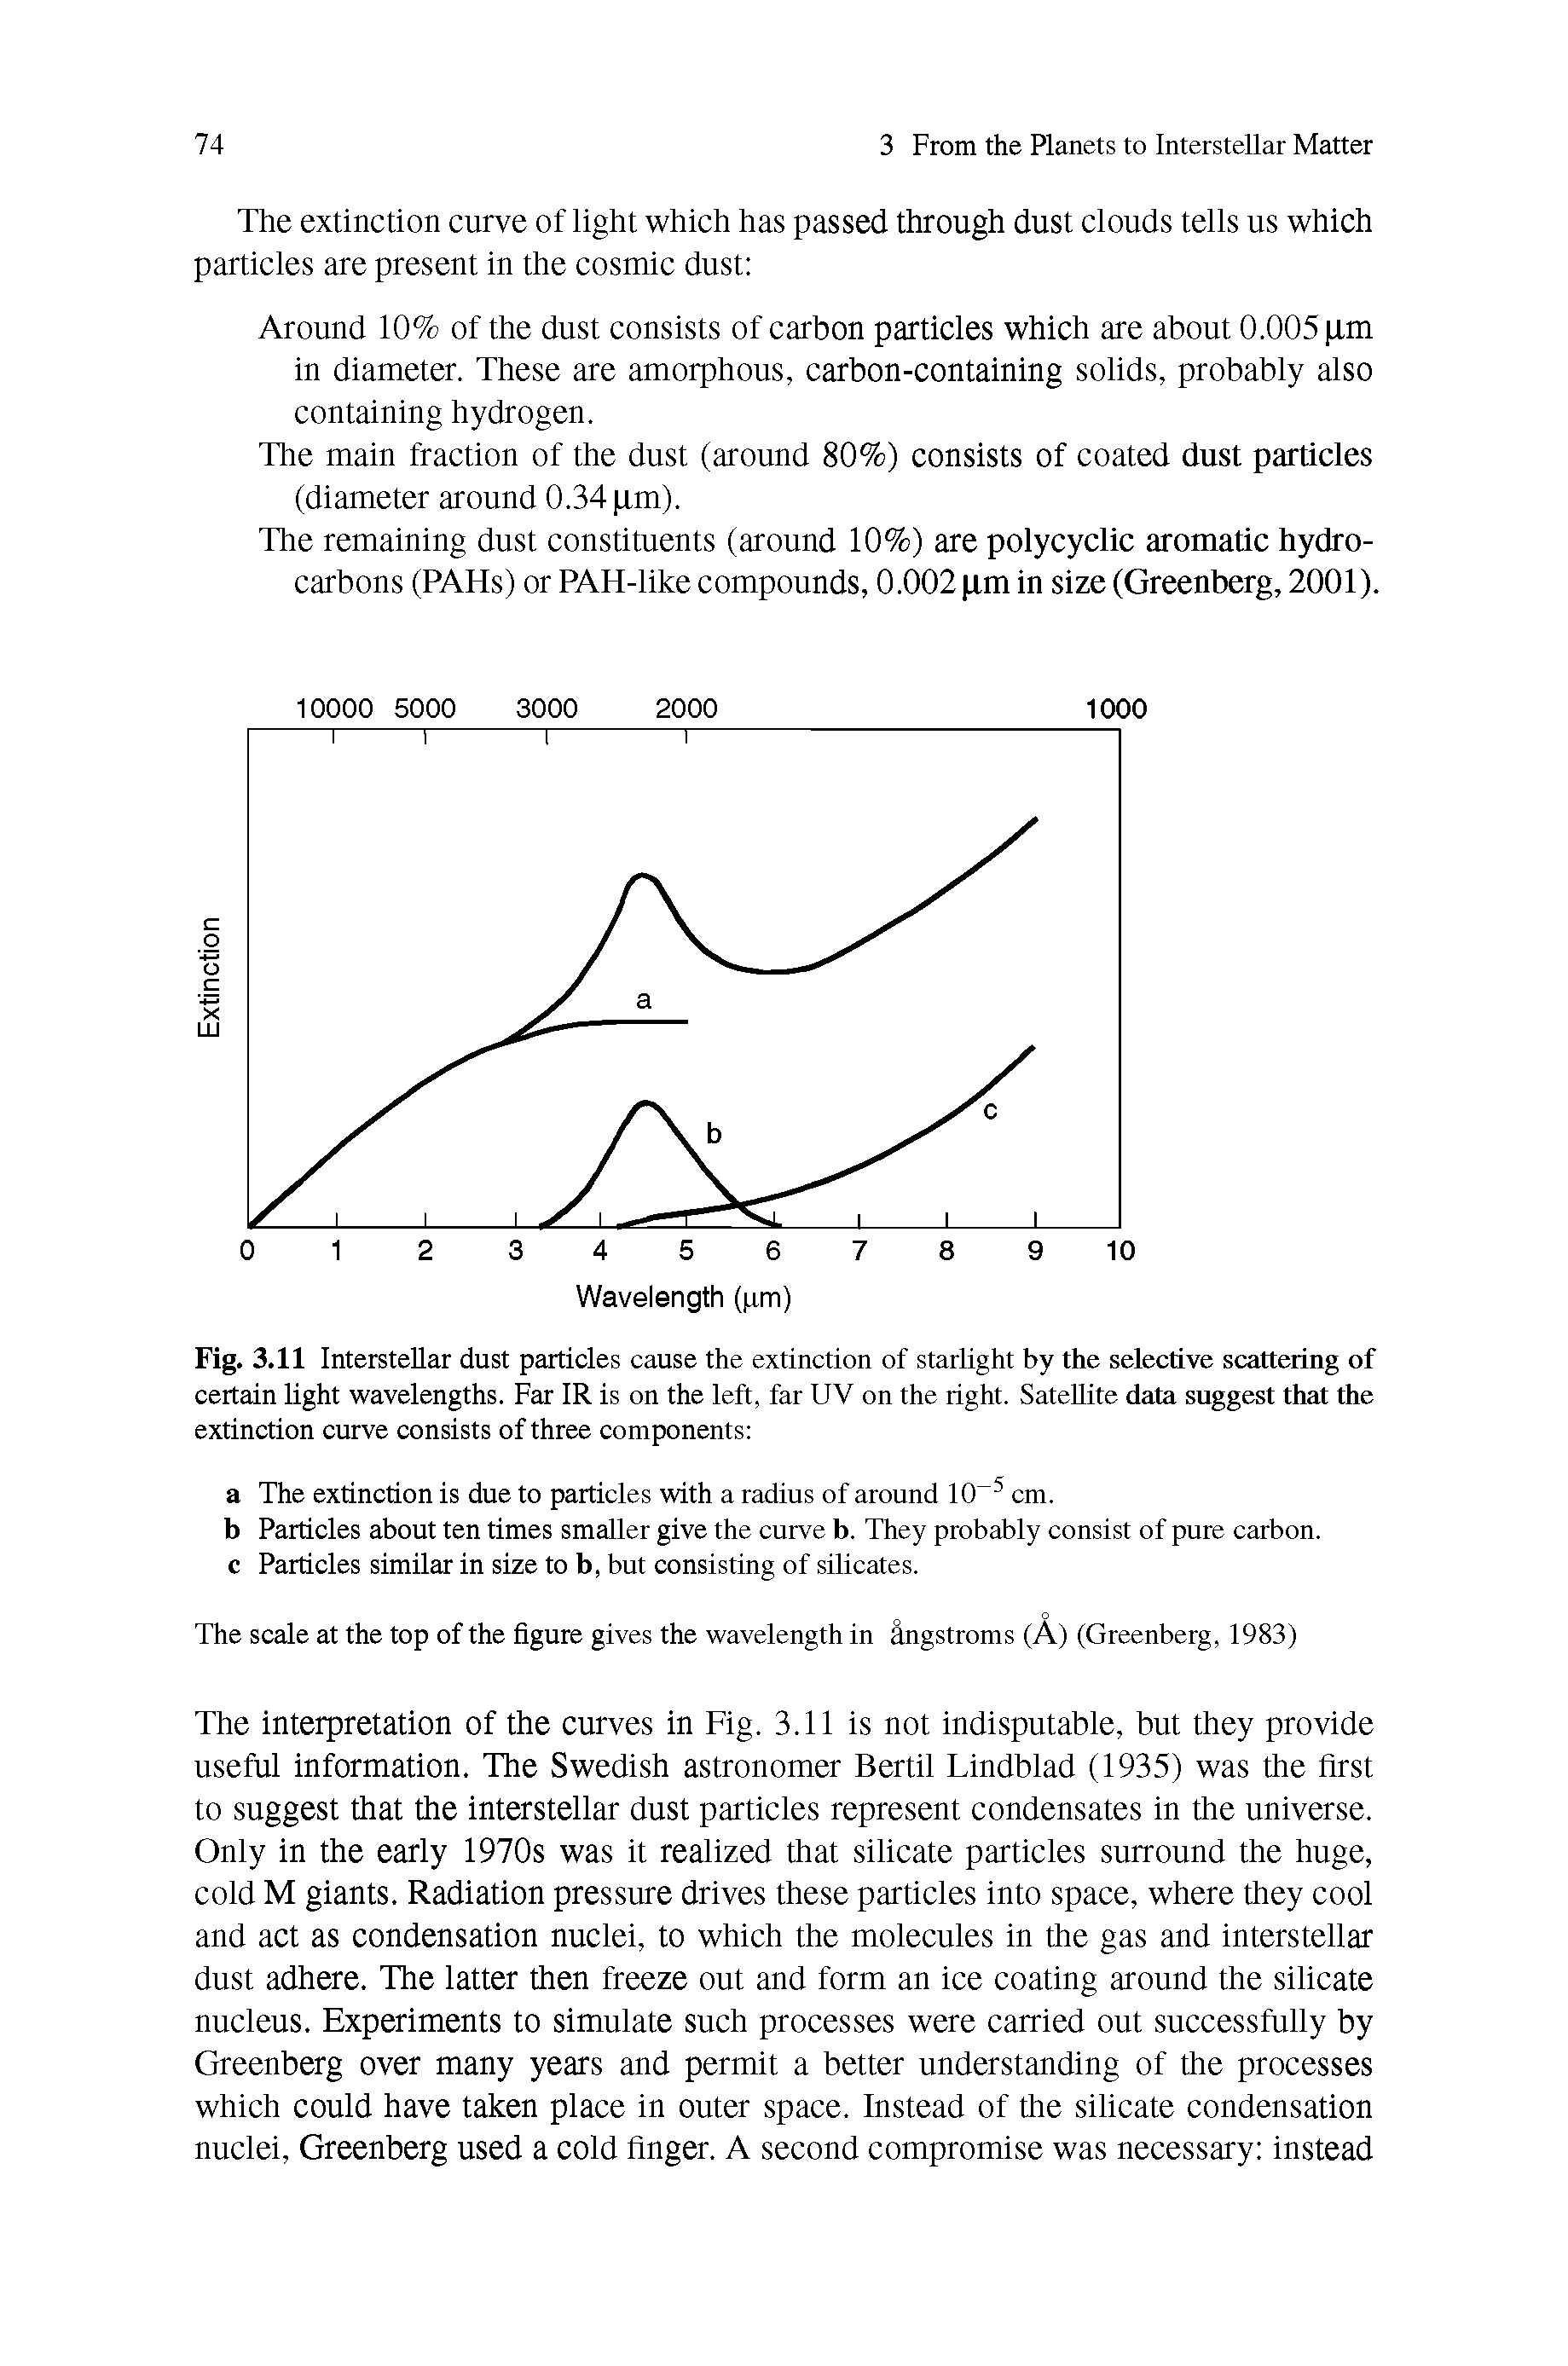 Fig. 3.11 Interstellar dust particles cause the extinction of starlight by the selective scattering of certain light wavelengths. Far IR is on the left, far UV on the right. Satellite data suggest that the extinction curve consists of three components ...